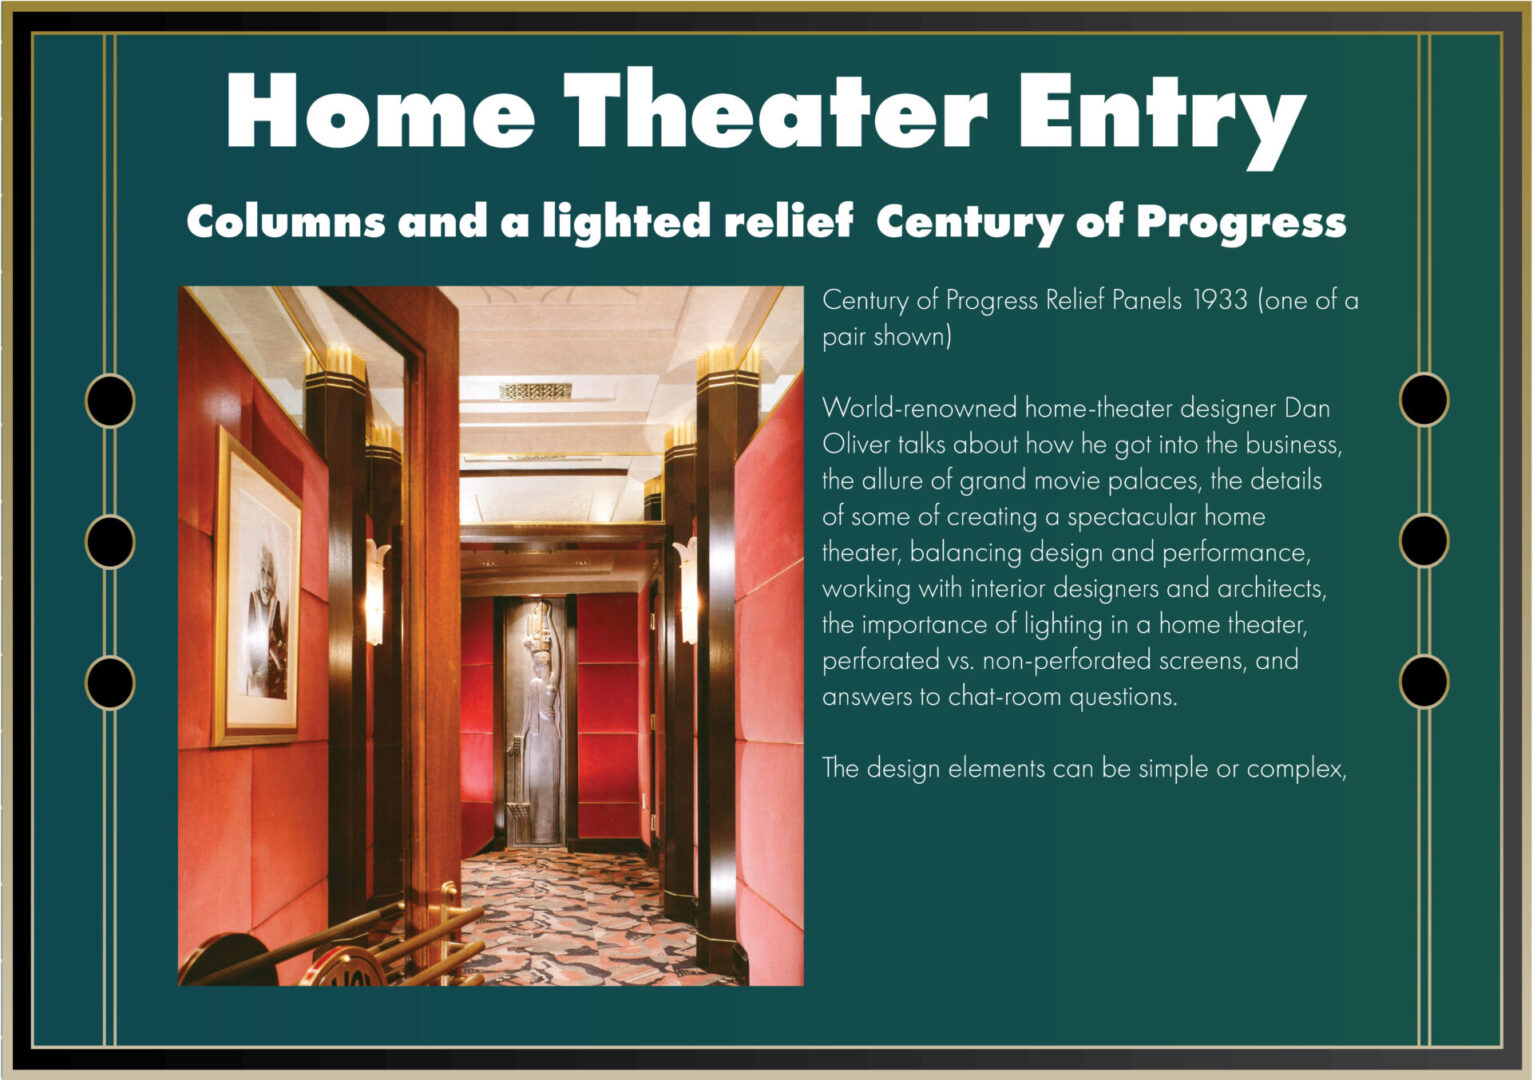 Century of Progress Relief Panels for Home Theater Entry